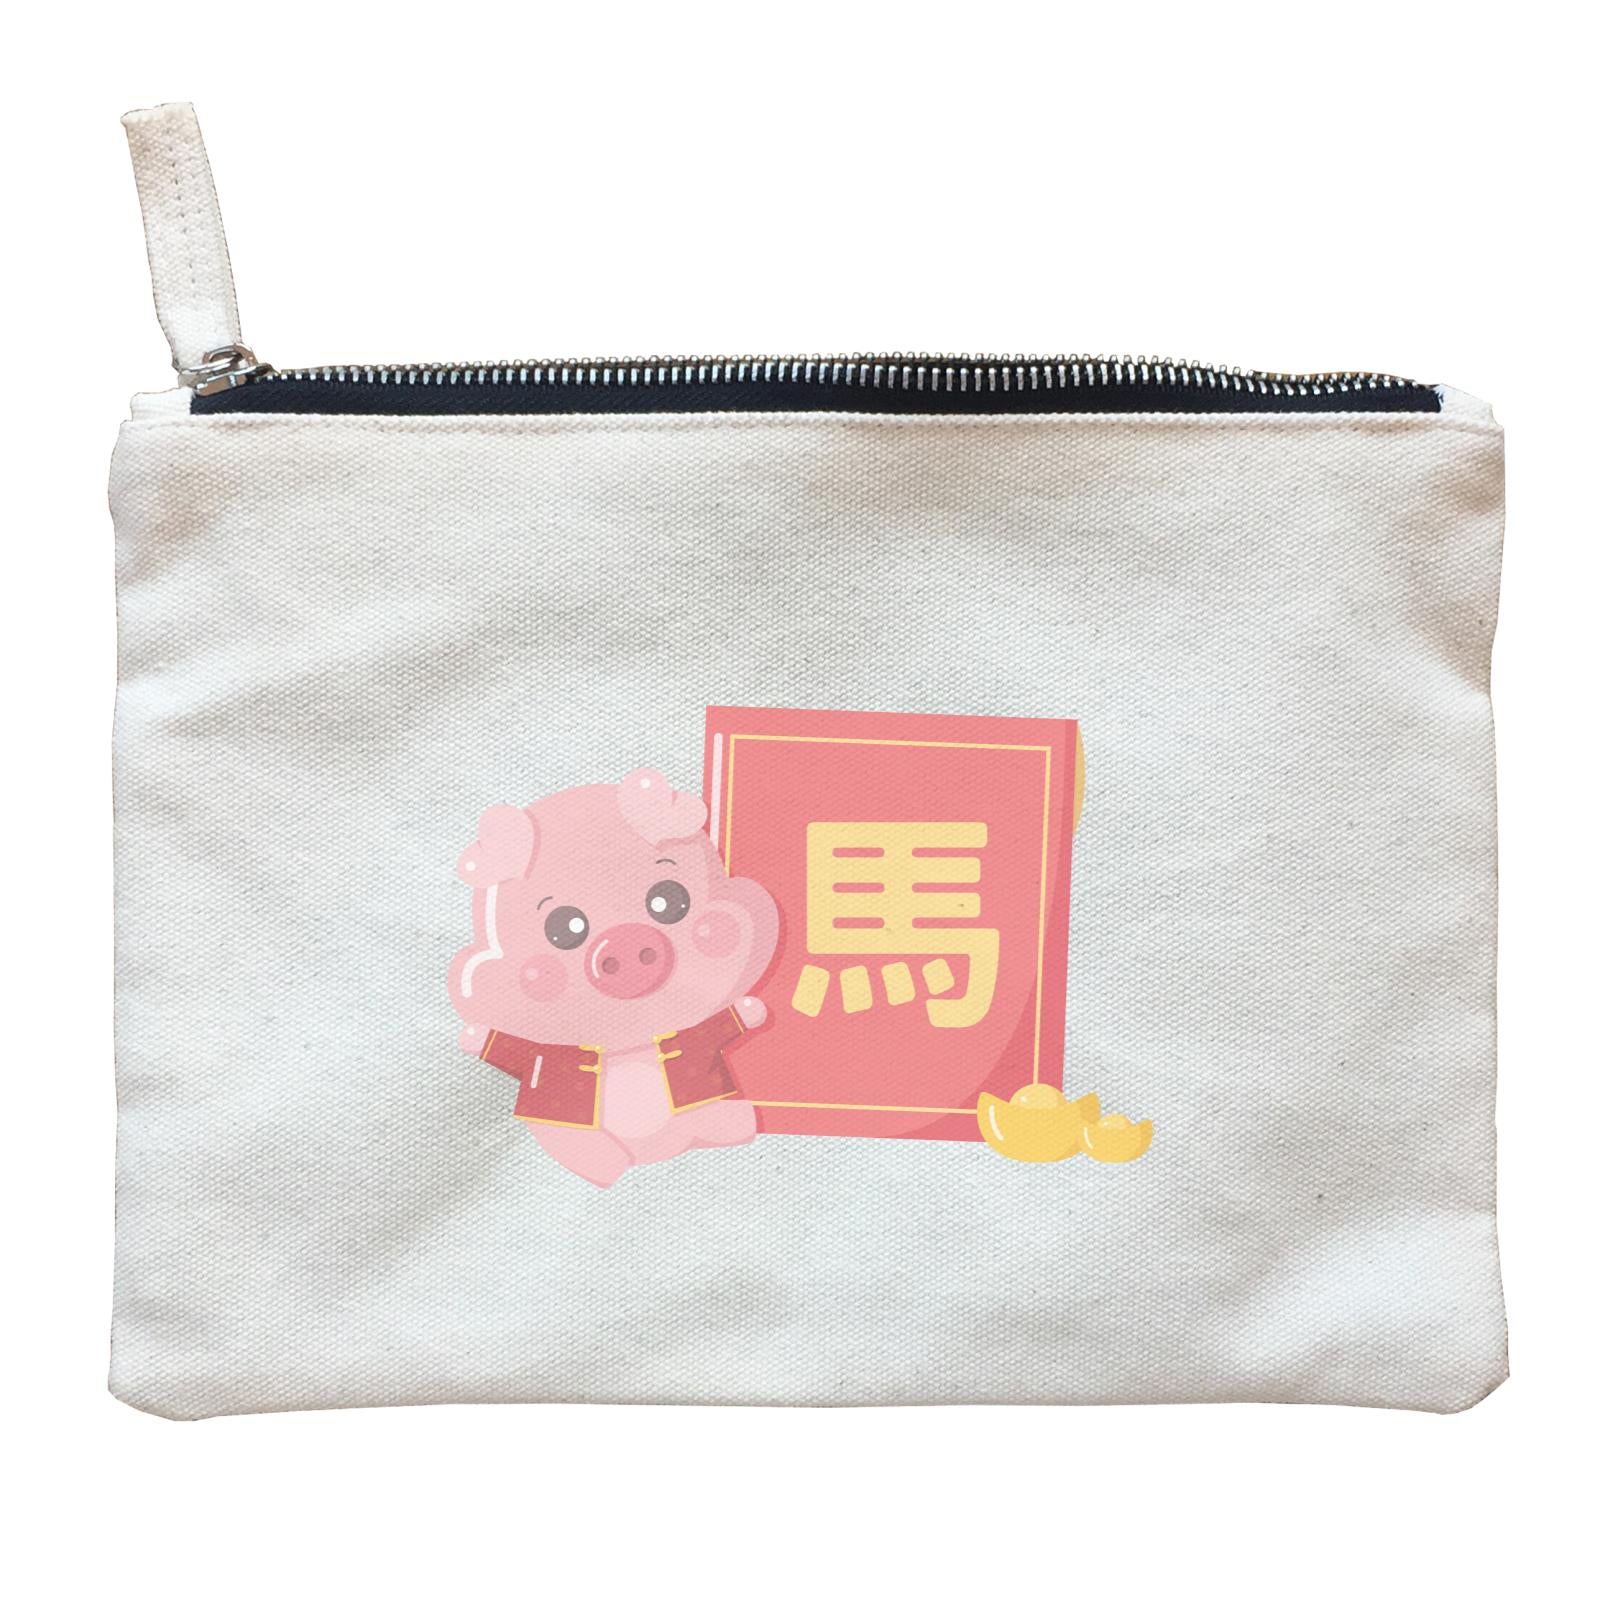 Chinese New Year Cute Pig Angpau Boy Accessories With Addname Zipper Pouch